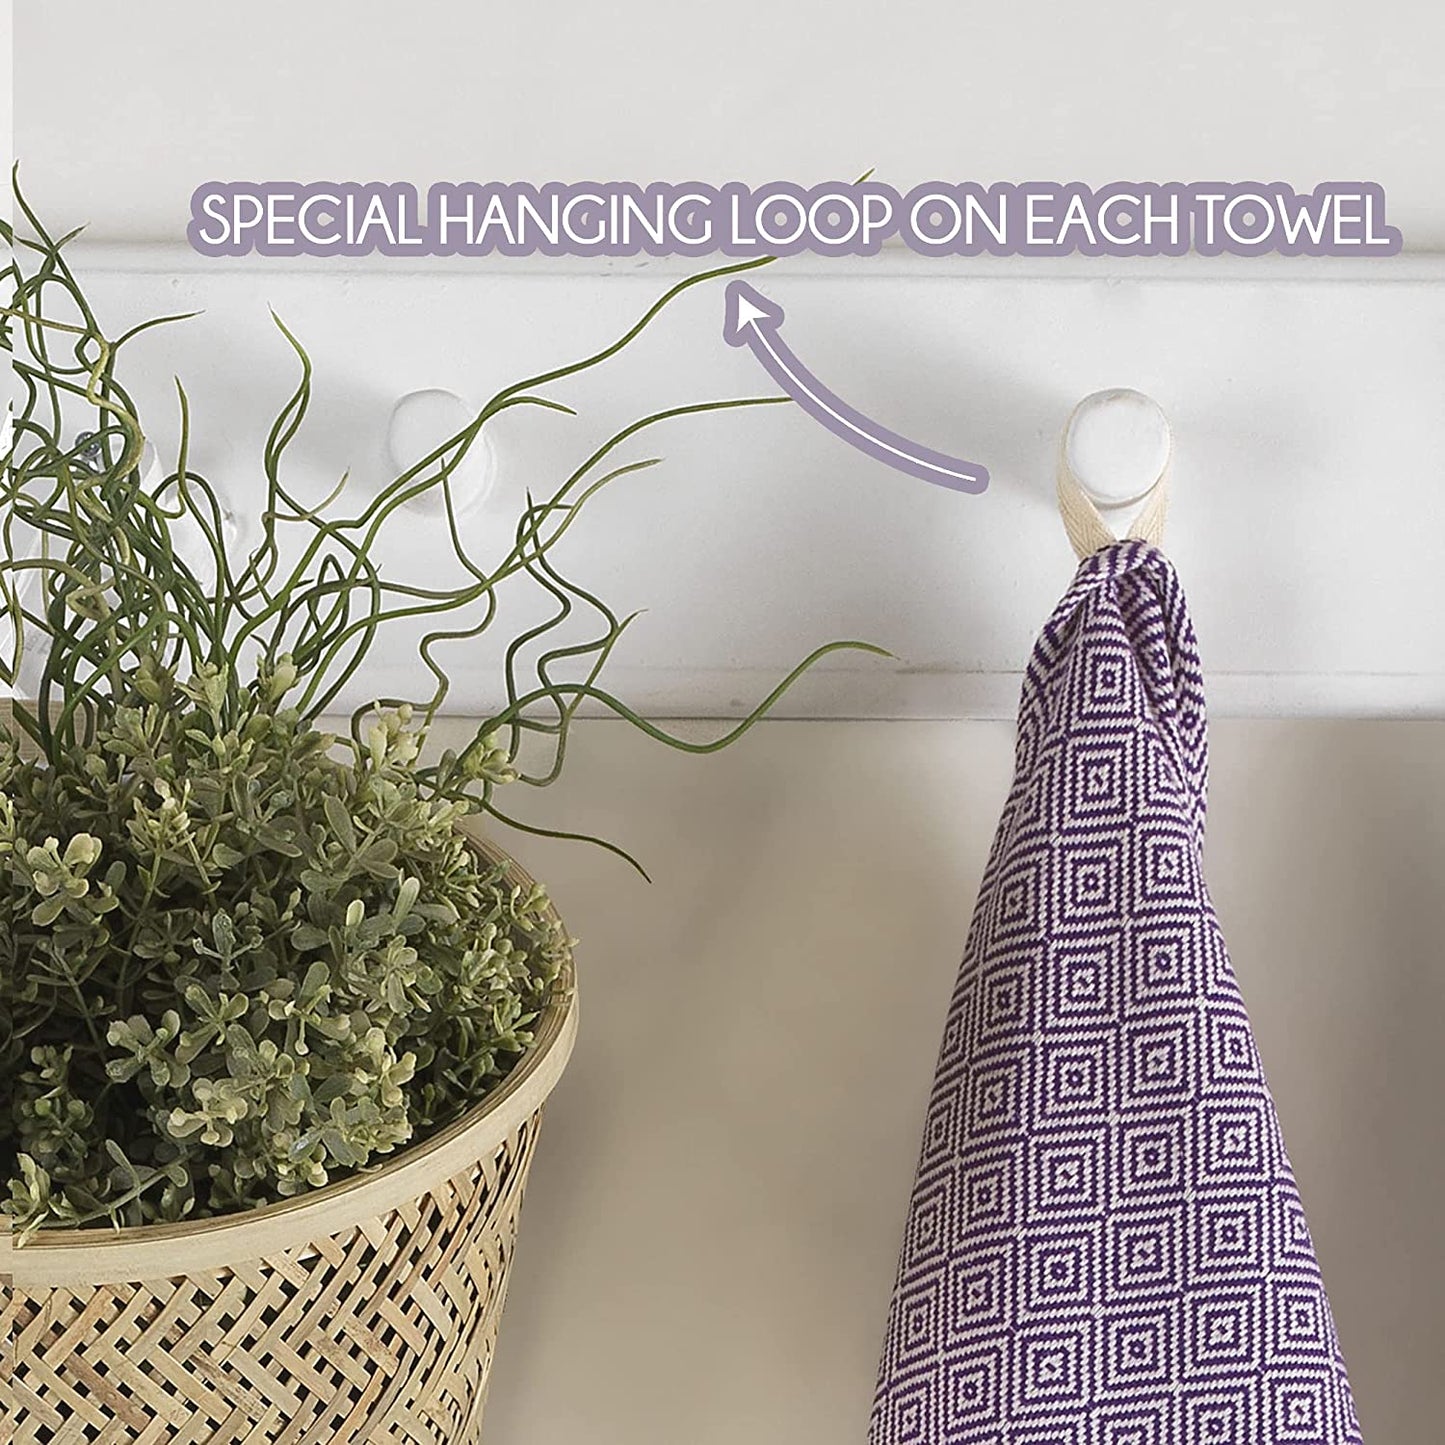 New 2 Home Kitchen Hand Towels Set of 2 | 100% Cotton Decorative Turkish Hand Towels for Bathroom, Gym, Yoga, SPA | Quick Dry Farmhouse Towels for Hands, Hair and Face (19x39 inches, Purple)